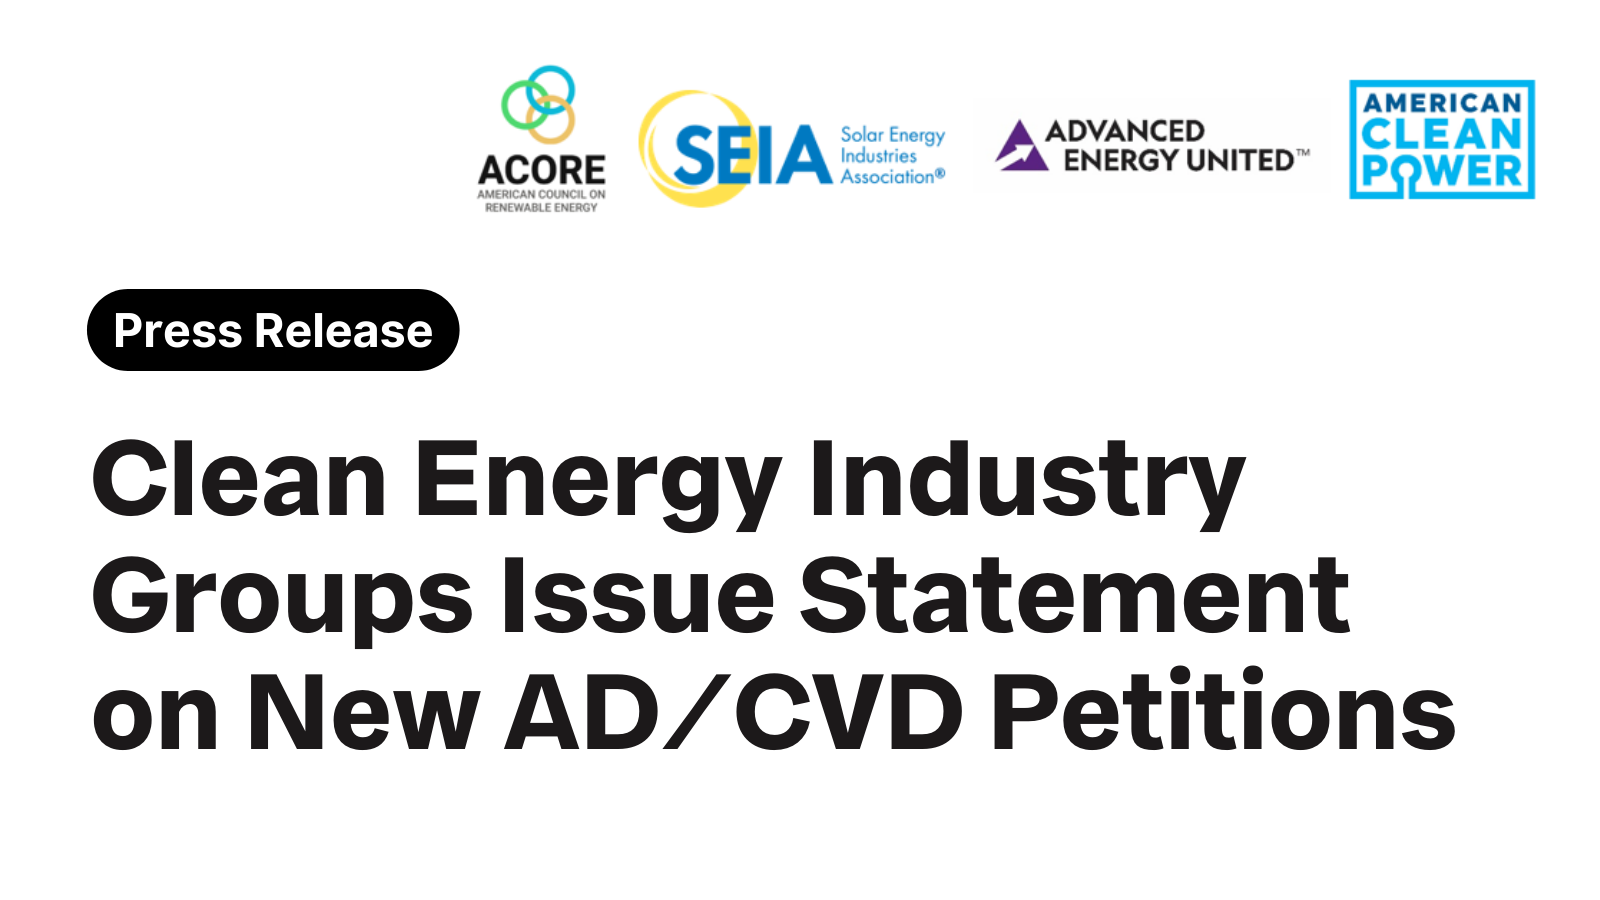 Clean Energy Industry Groups Issue Statement on New AD/CVD Petitions